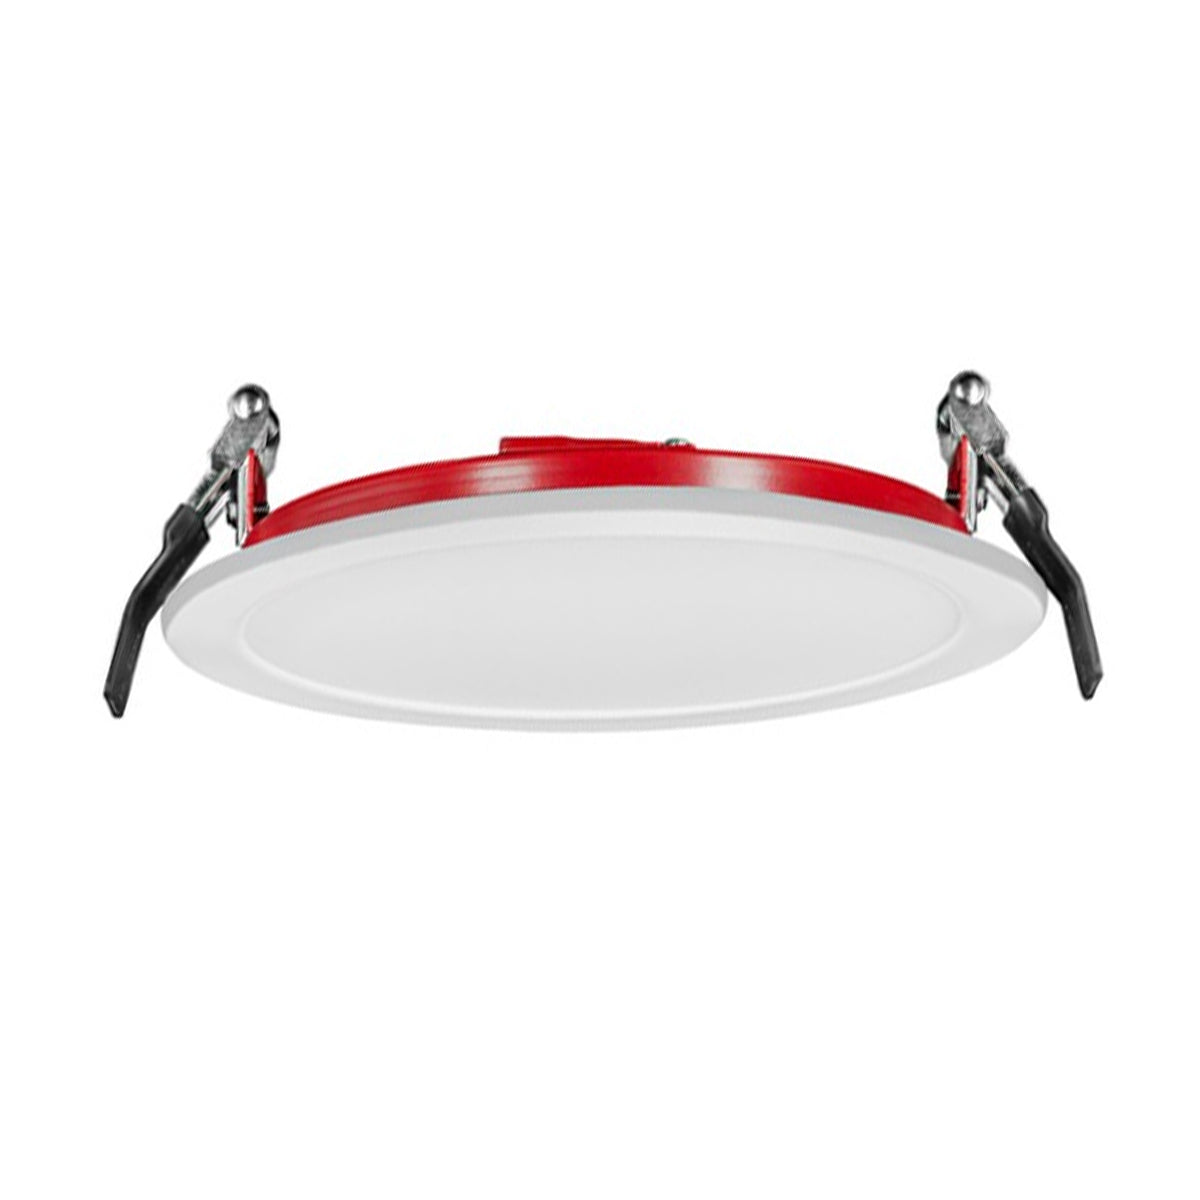 6 inch Flame Resistant Slim Microdisk LED Canless Recessed Light, 14 Watt, 1200 Lumens, Selectable CCT, 2700K to 5000K, 120V